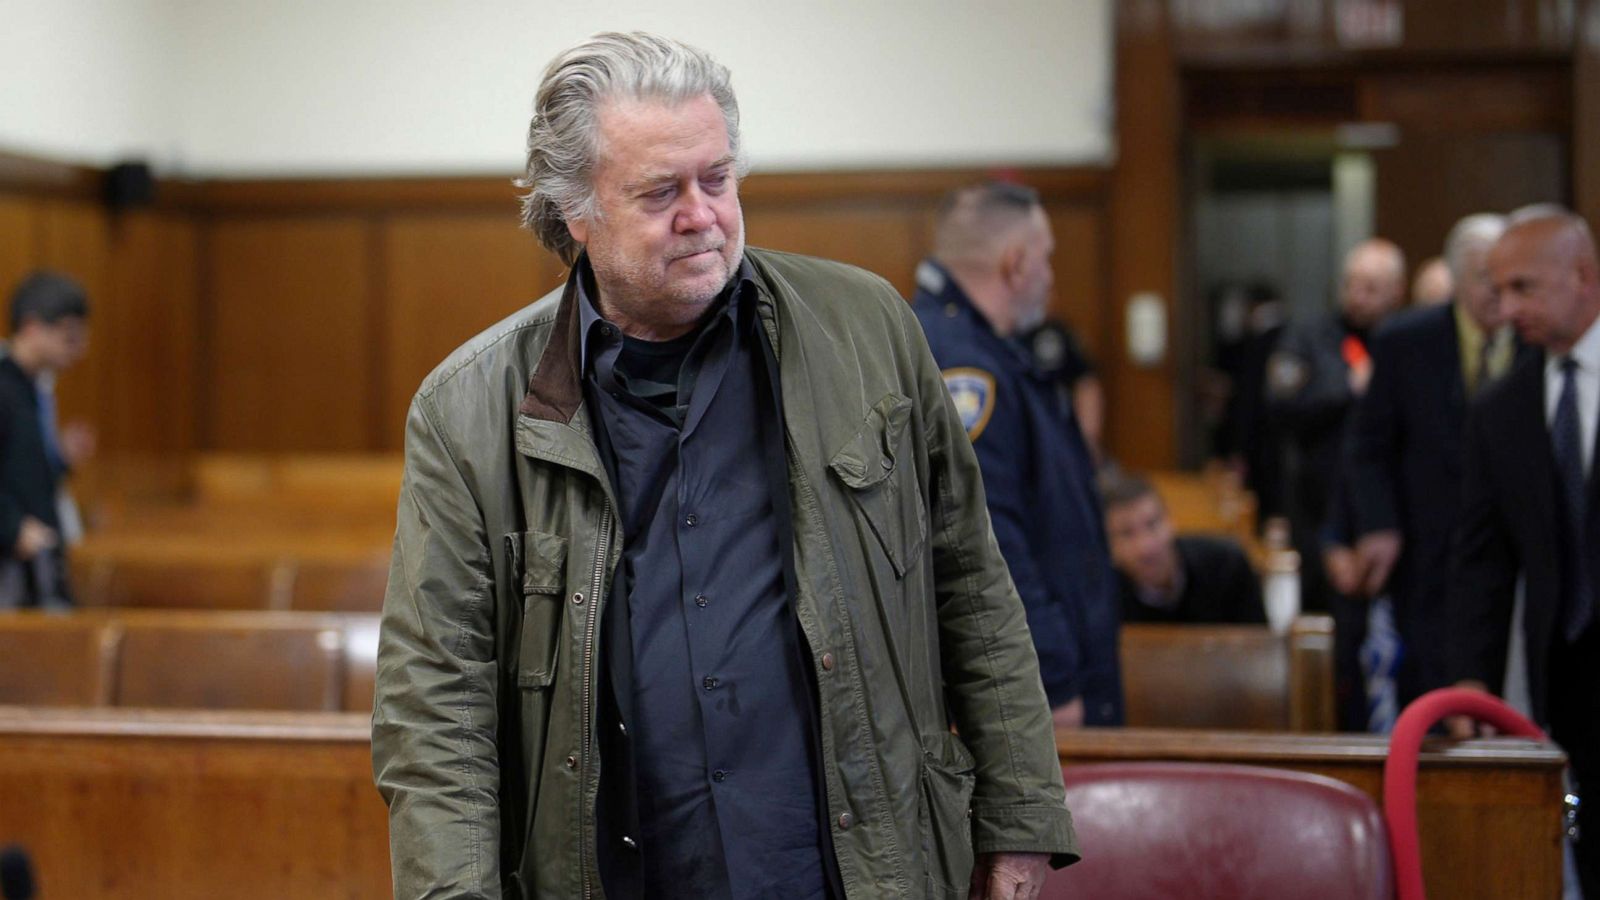 Steven Bannon standing in a U.S. courtroom